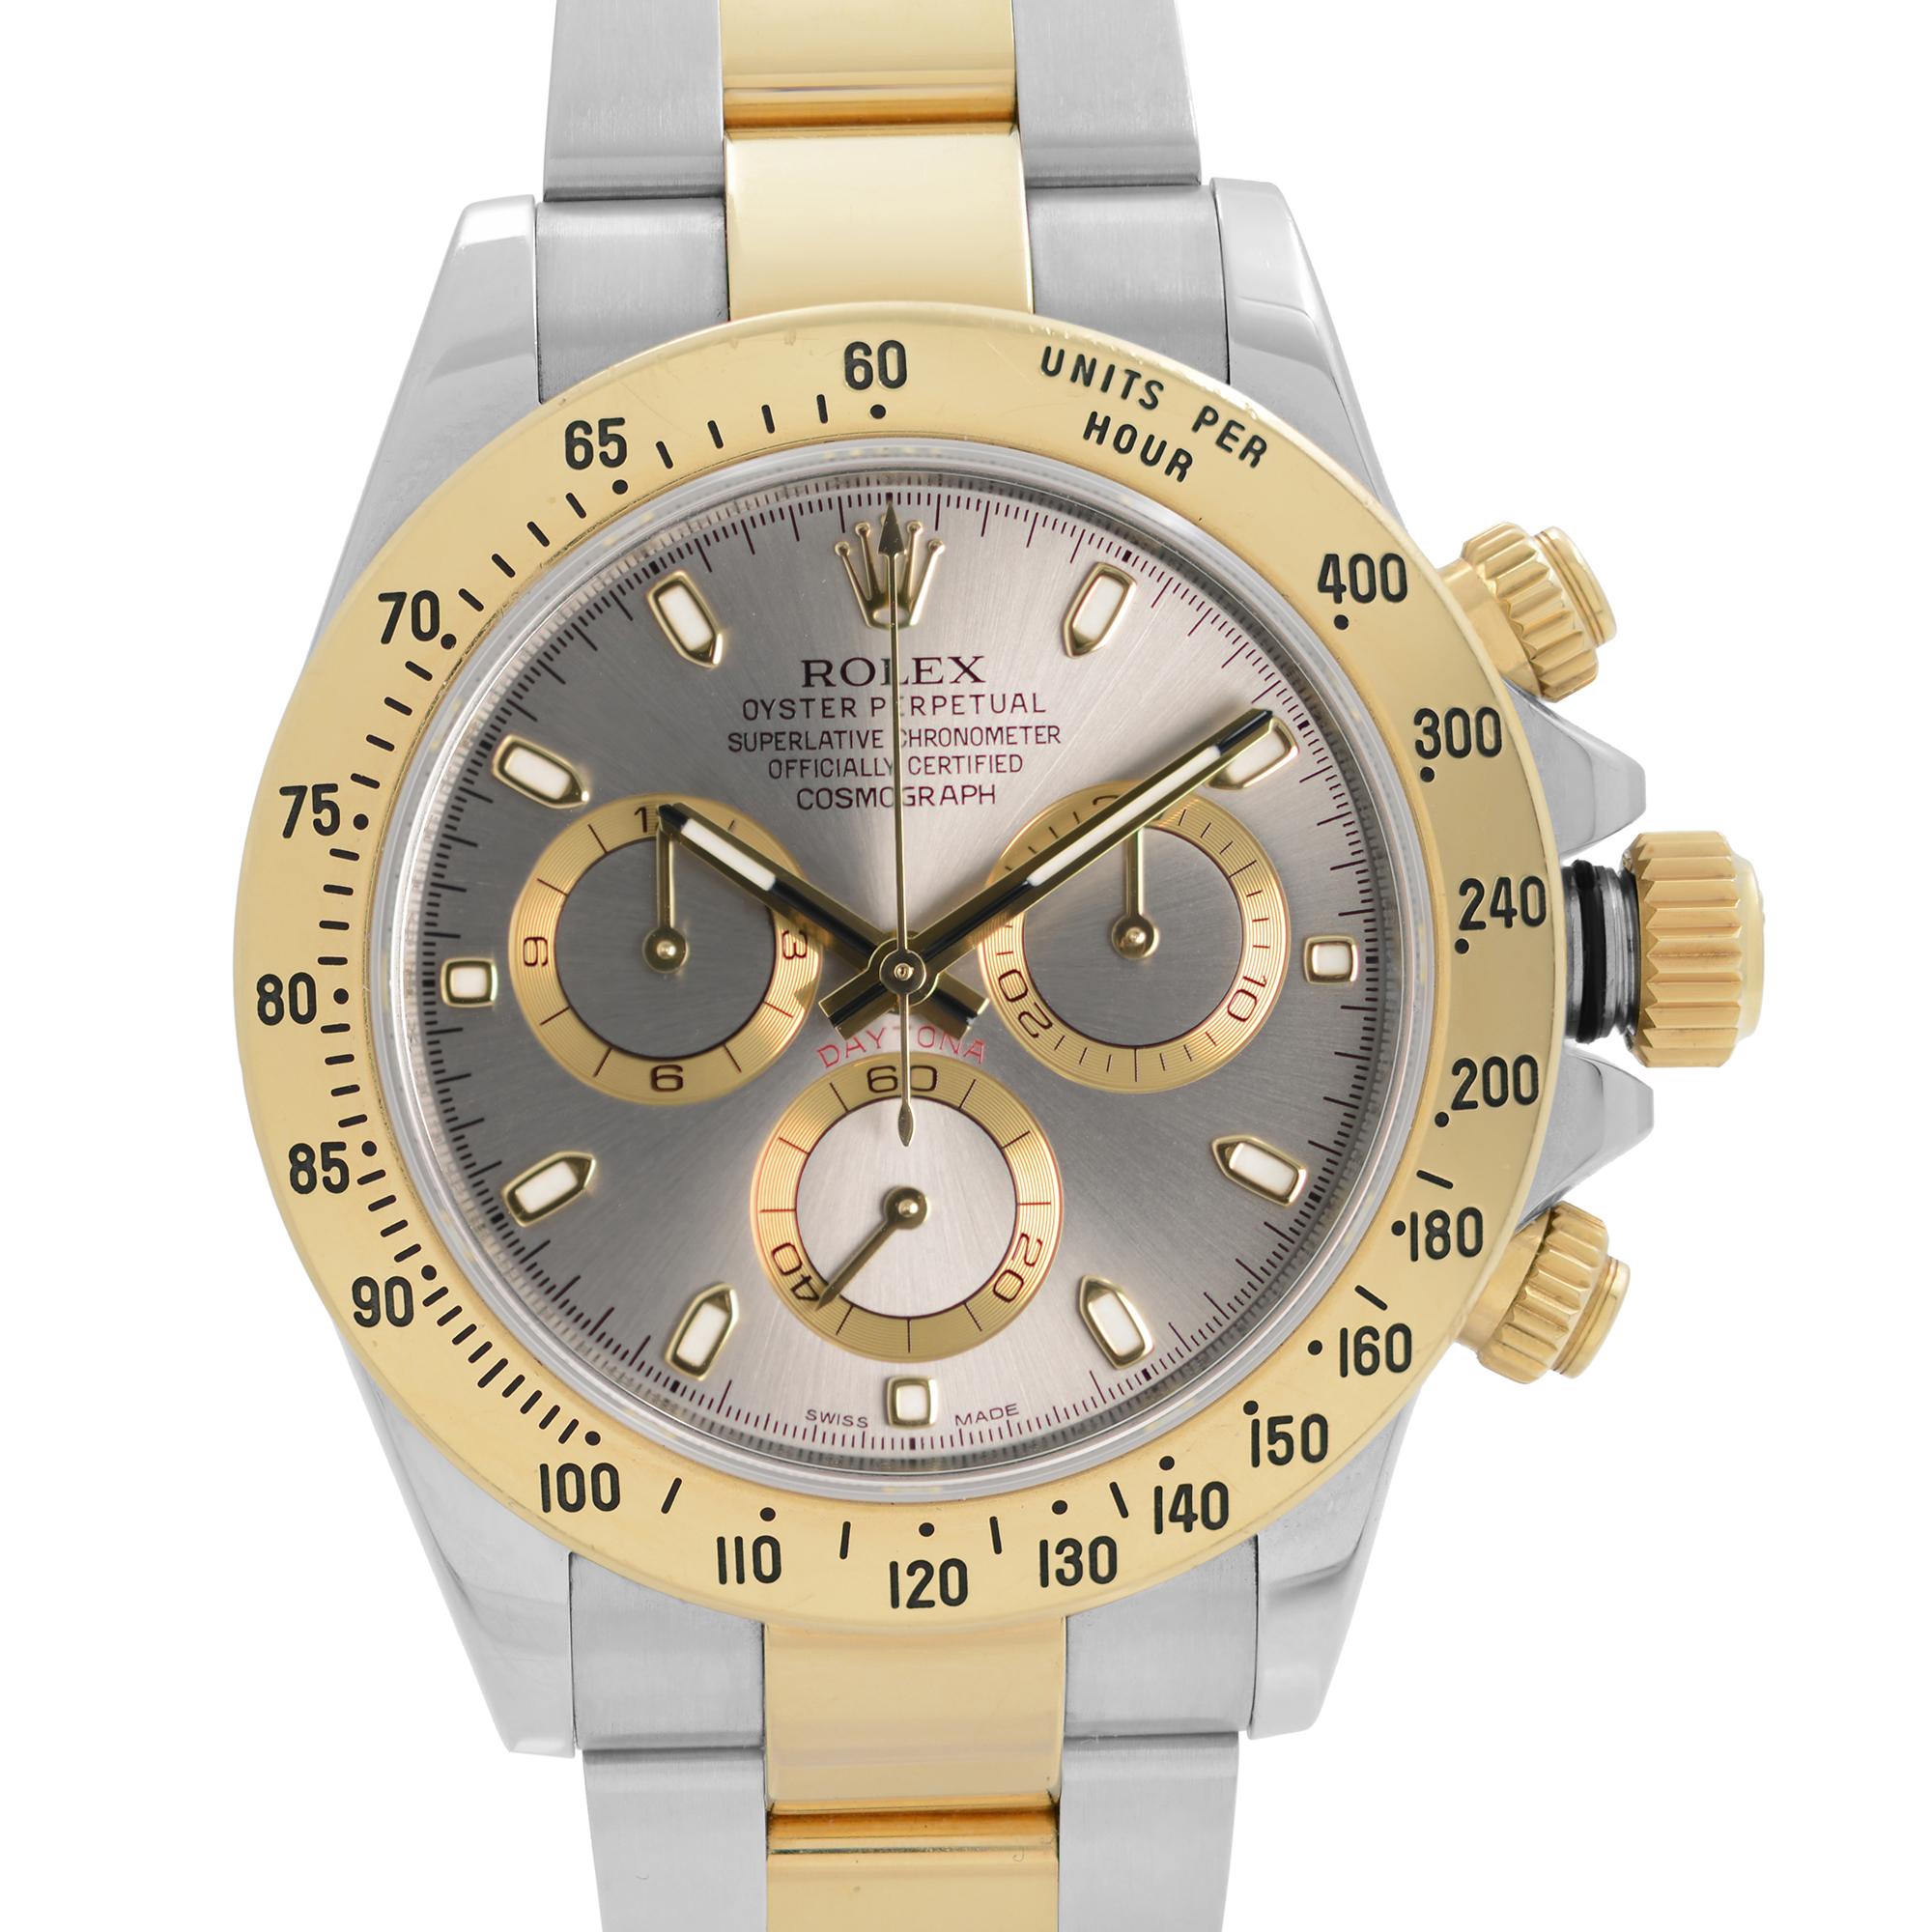 Pre Owned Rolex Daytona 18K Yellow Gold Steel Grey Dial Automatic Men's Watch 116523. G-Series. This Beautiful Timepiece is Powered by Mechanical (Automatic) Movement And Features: Round Stainless Steel Case, Fixed 18k Gold Bezel with Tachymeter